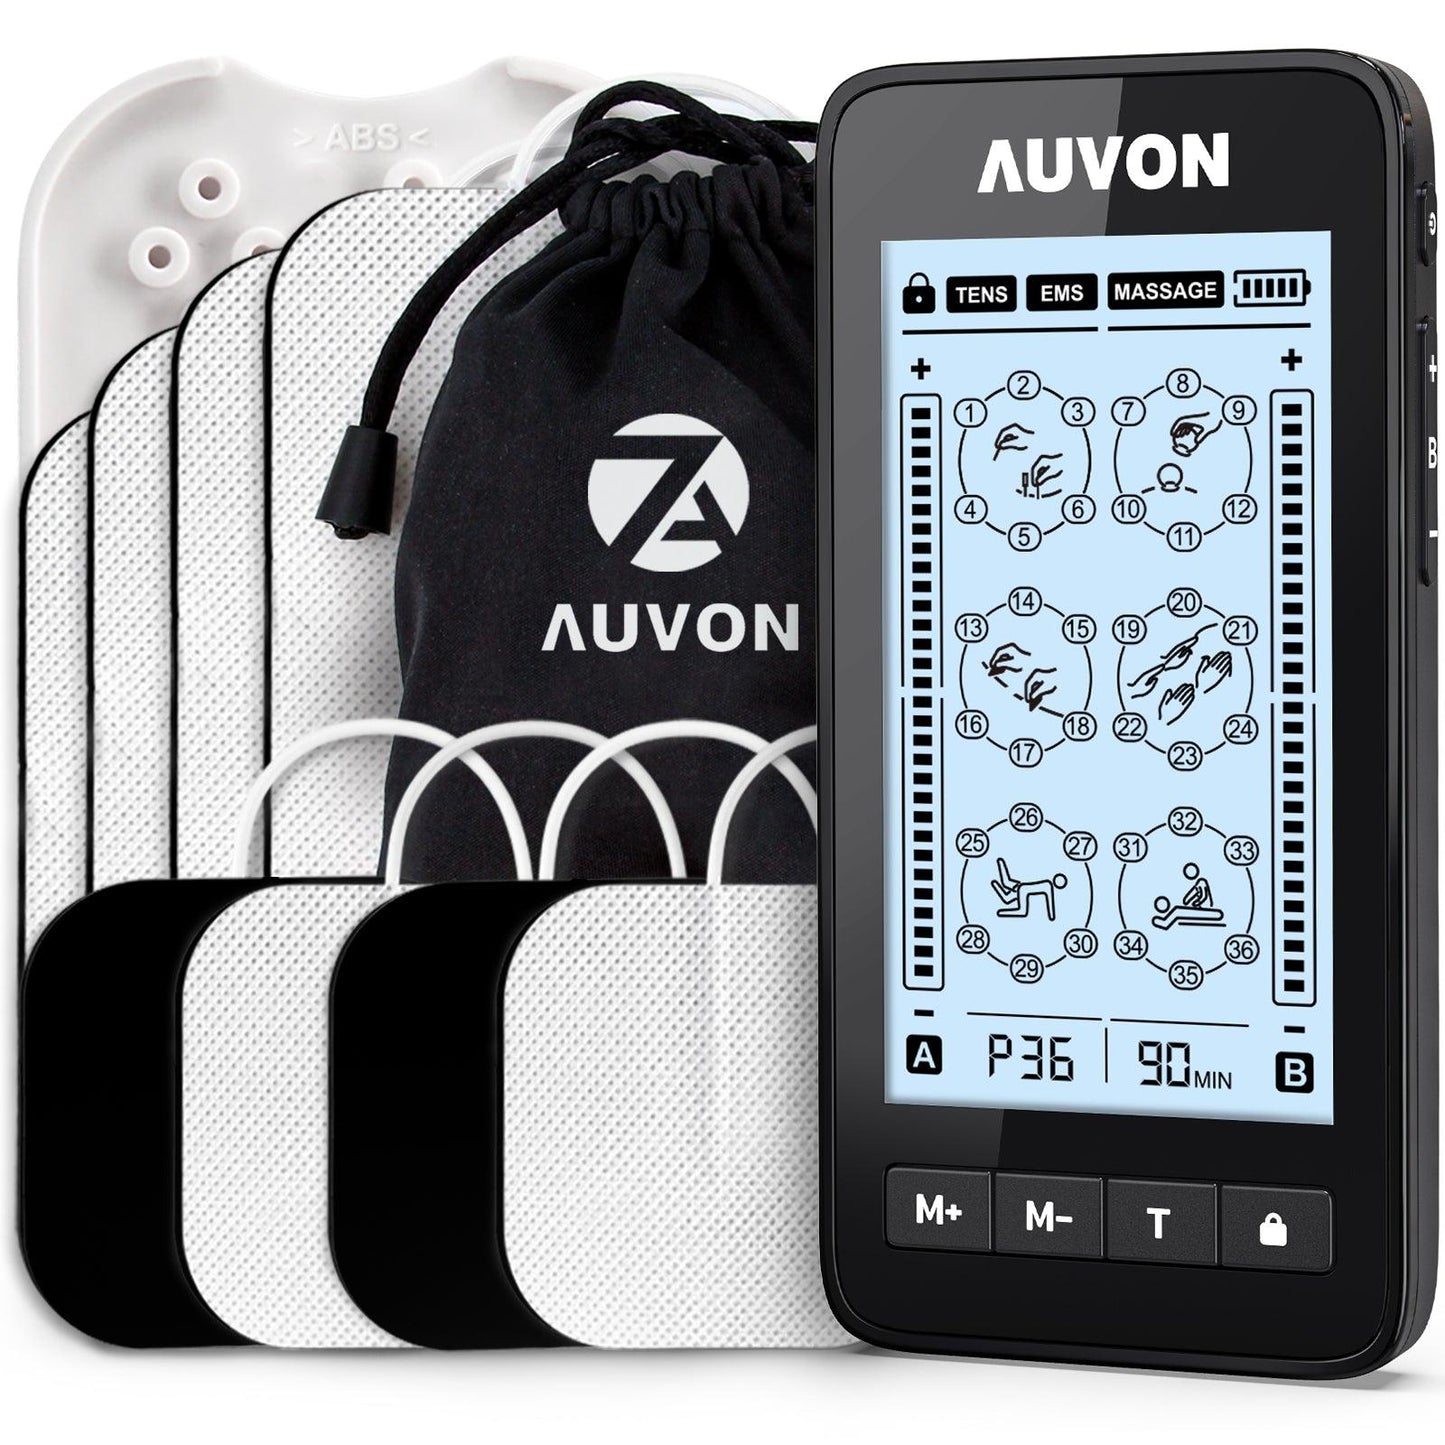 BLOCK PAIN & FEEL GREAT - Auvon TENS Unit Massager Review 